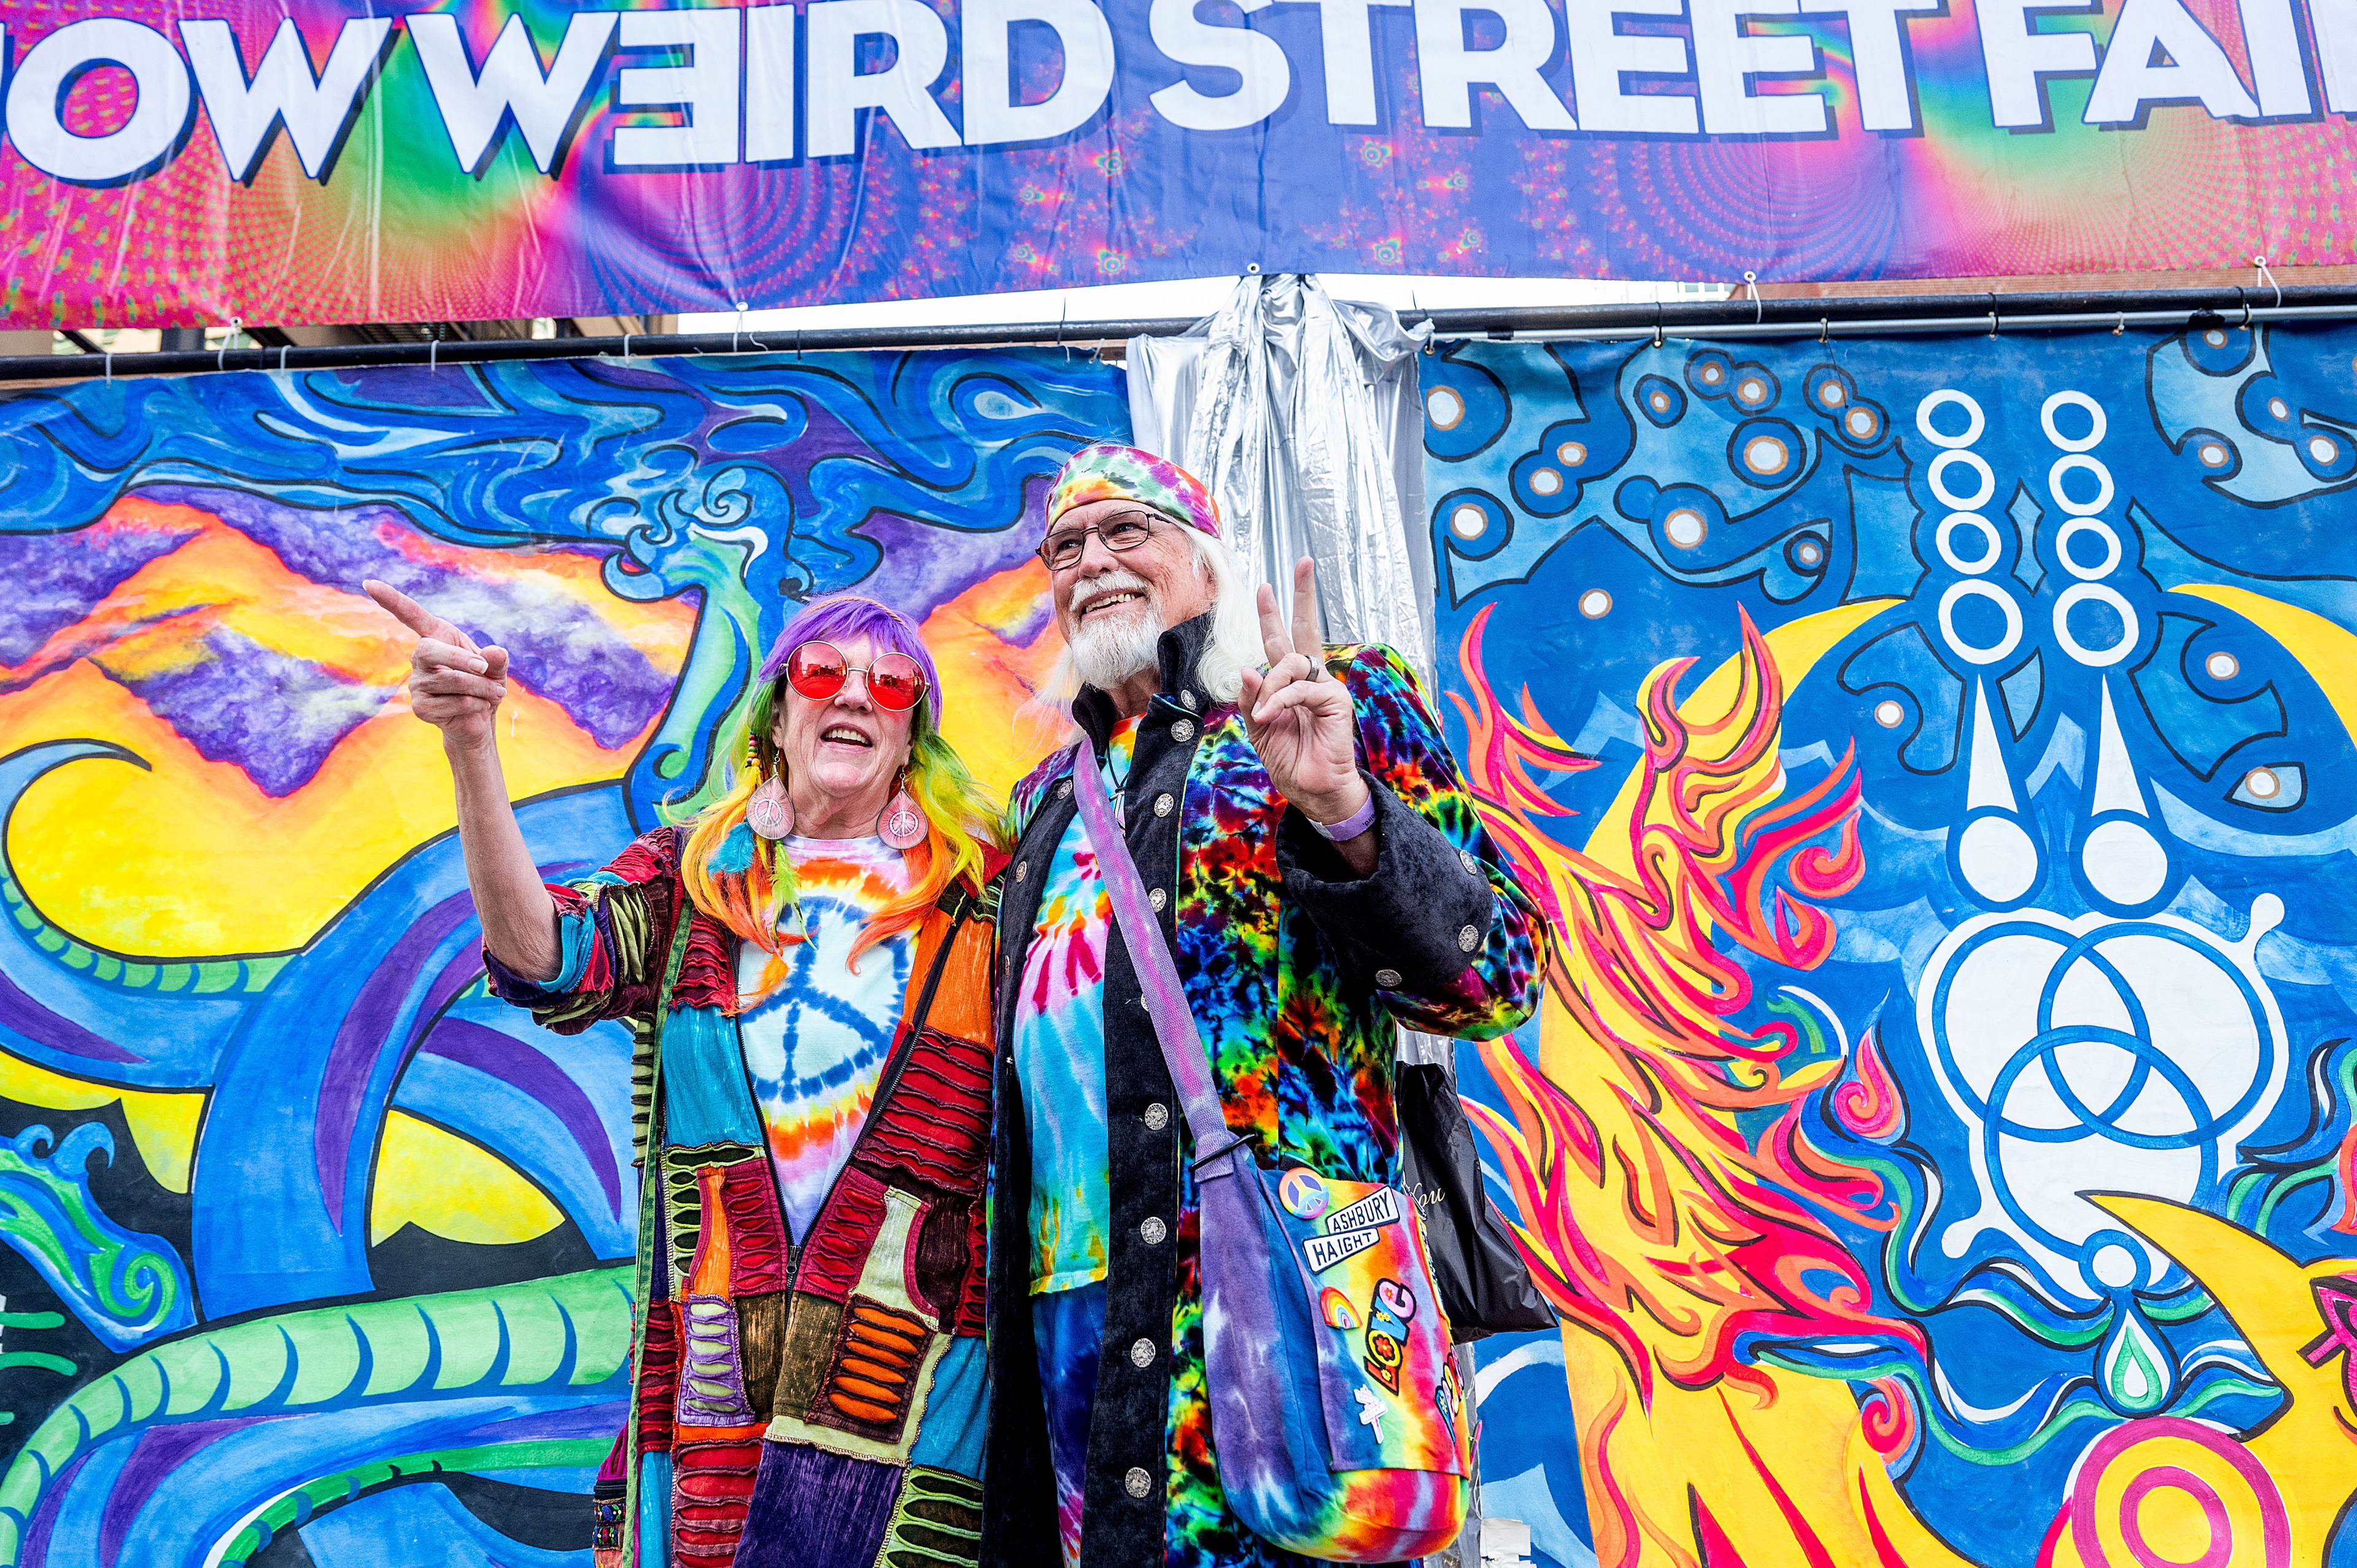 Out-of-This-World Costumes Plentiful at How Weird Street Faire in San Francsico